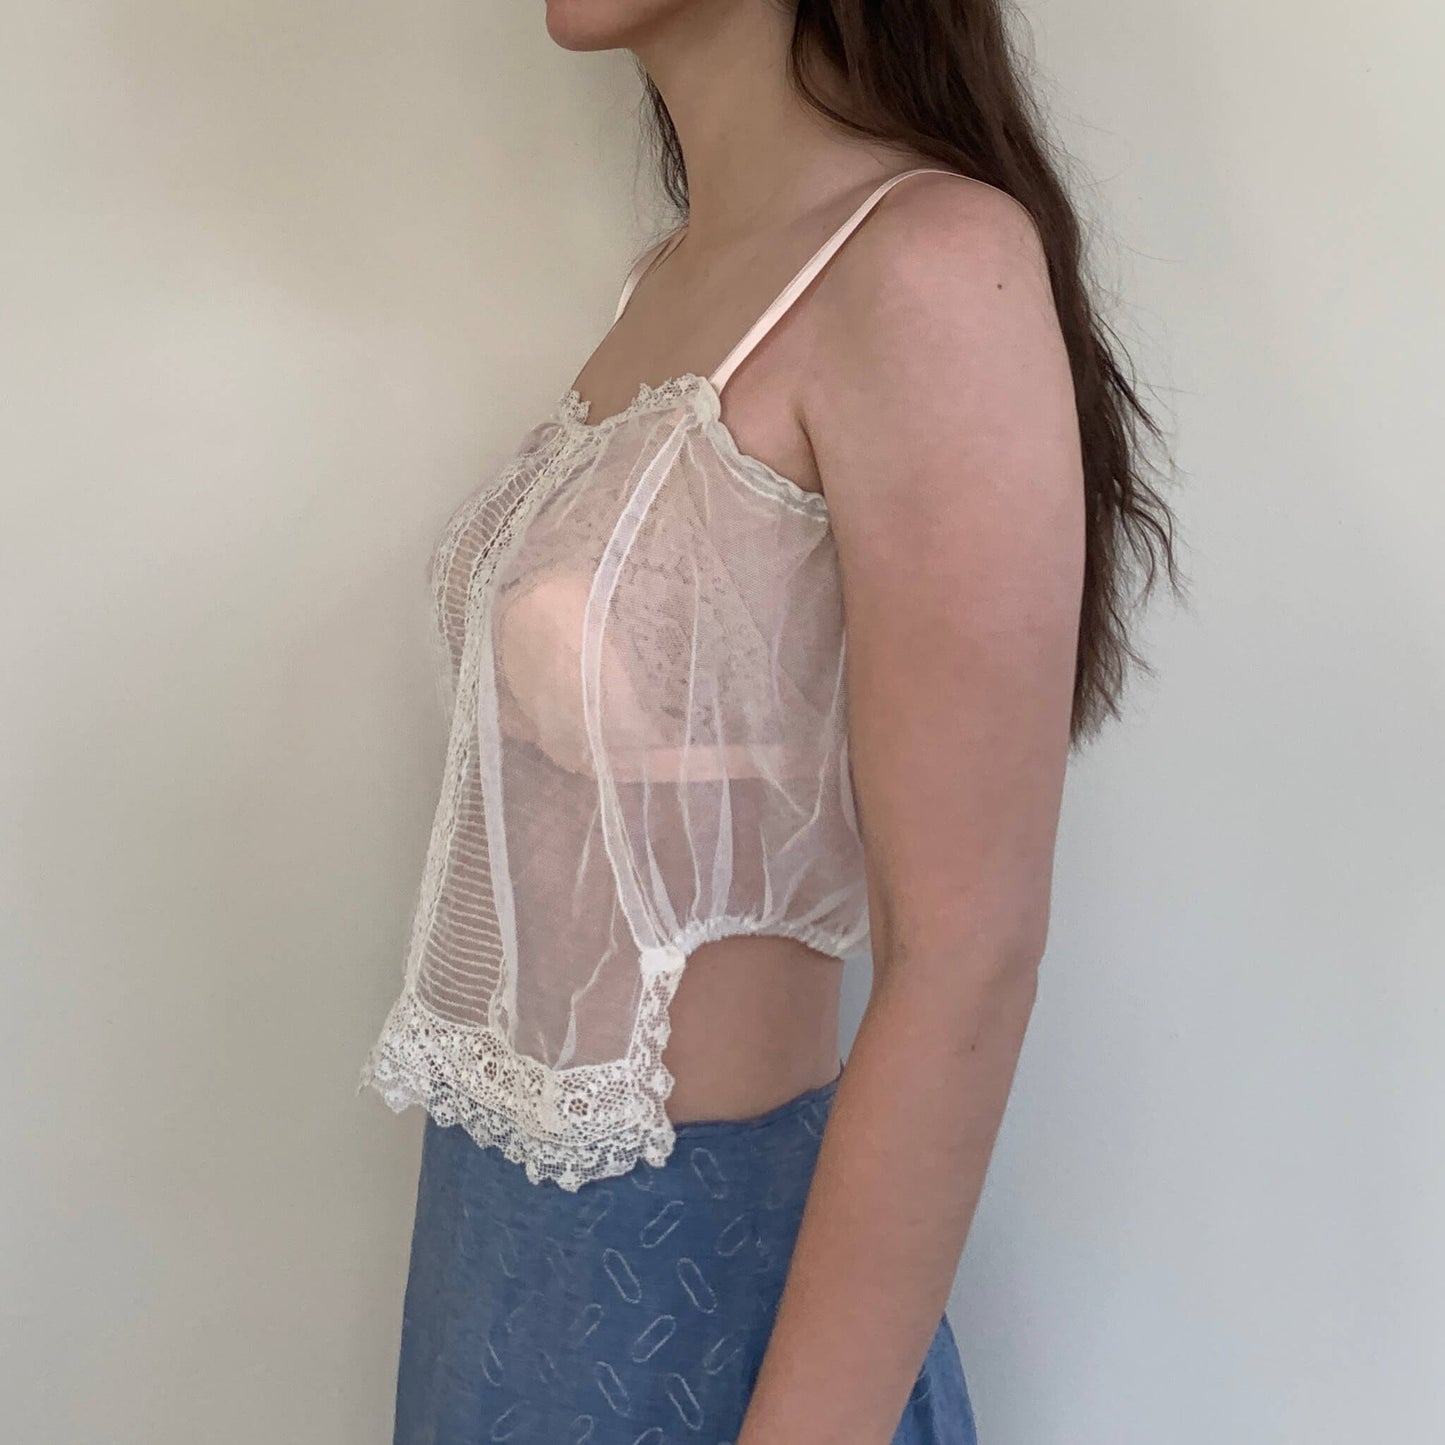 Sheer lace edwardian camisole on model view from the side